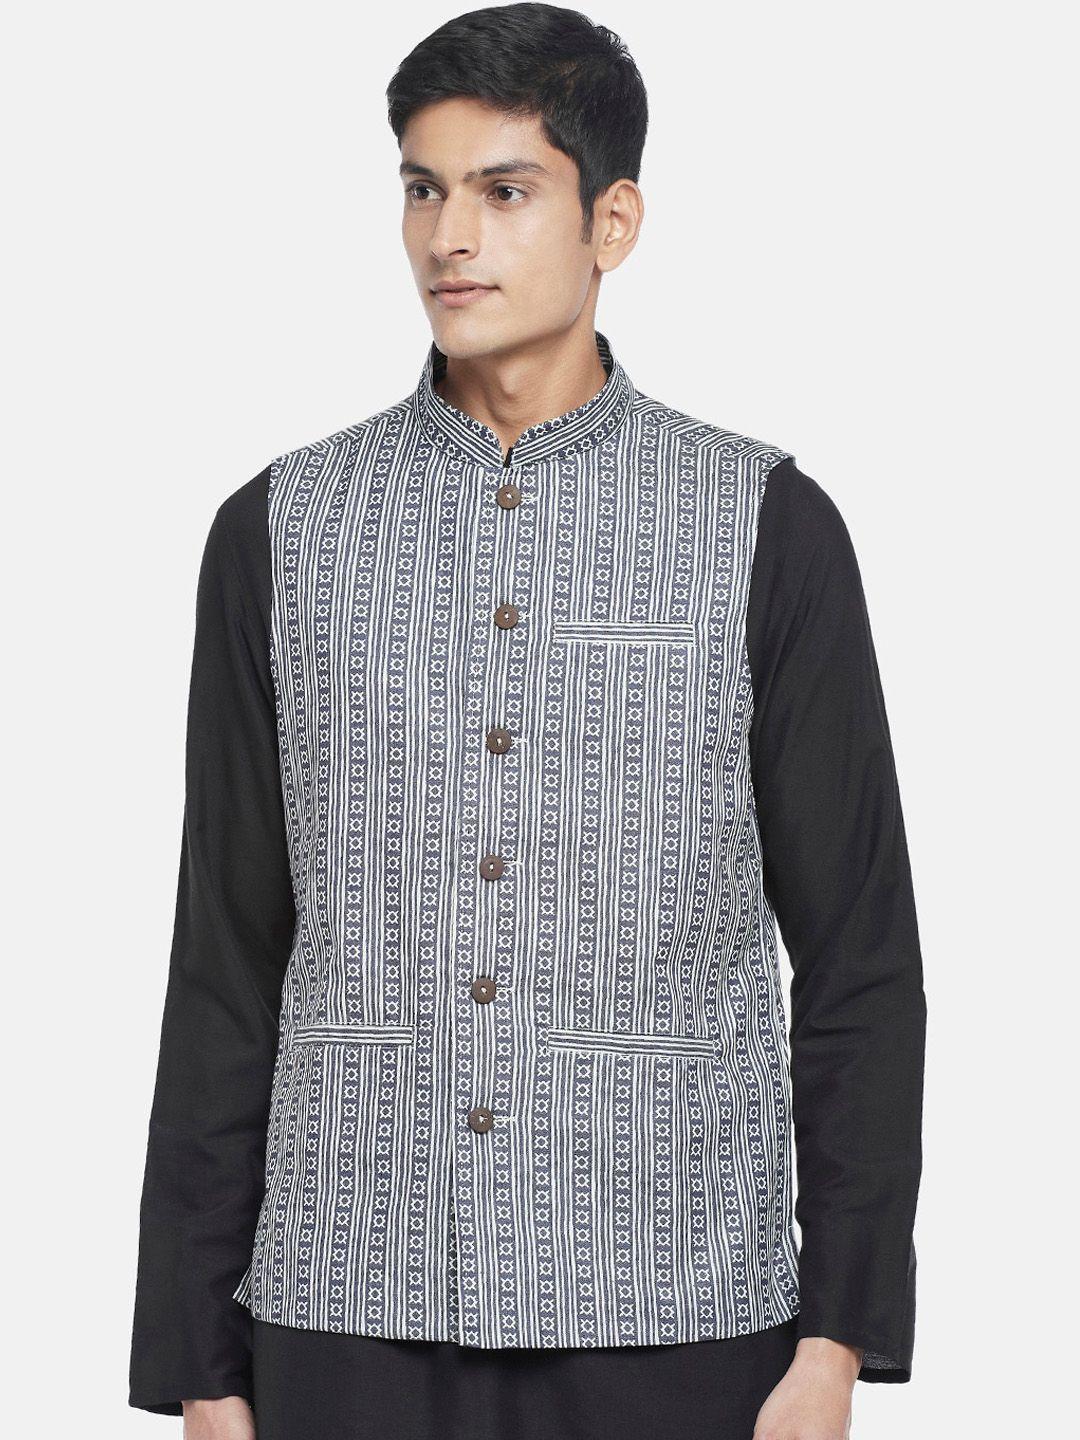 indus route by pantaloons men blue & white printed pure cotton woven waistcoat